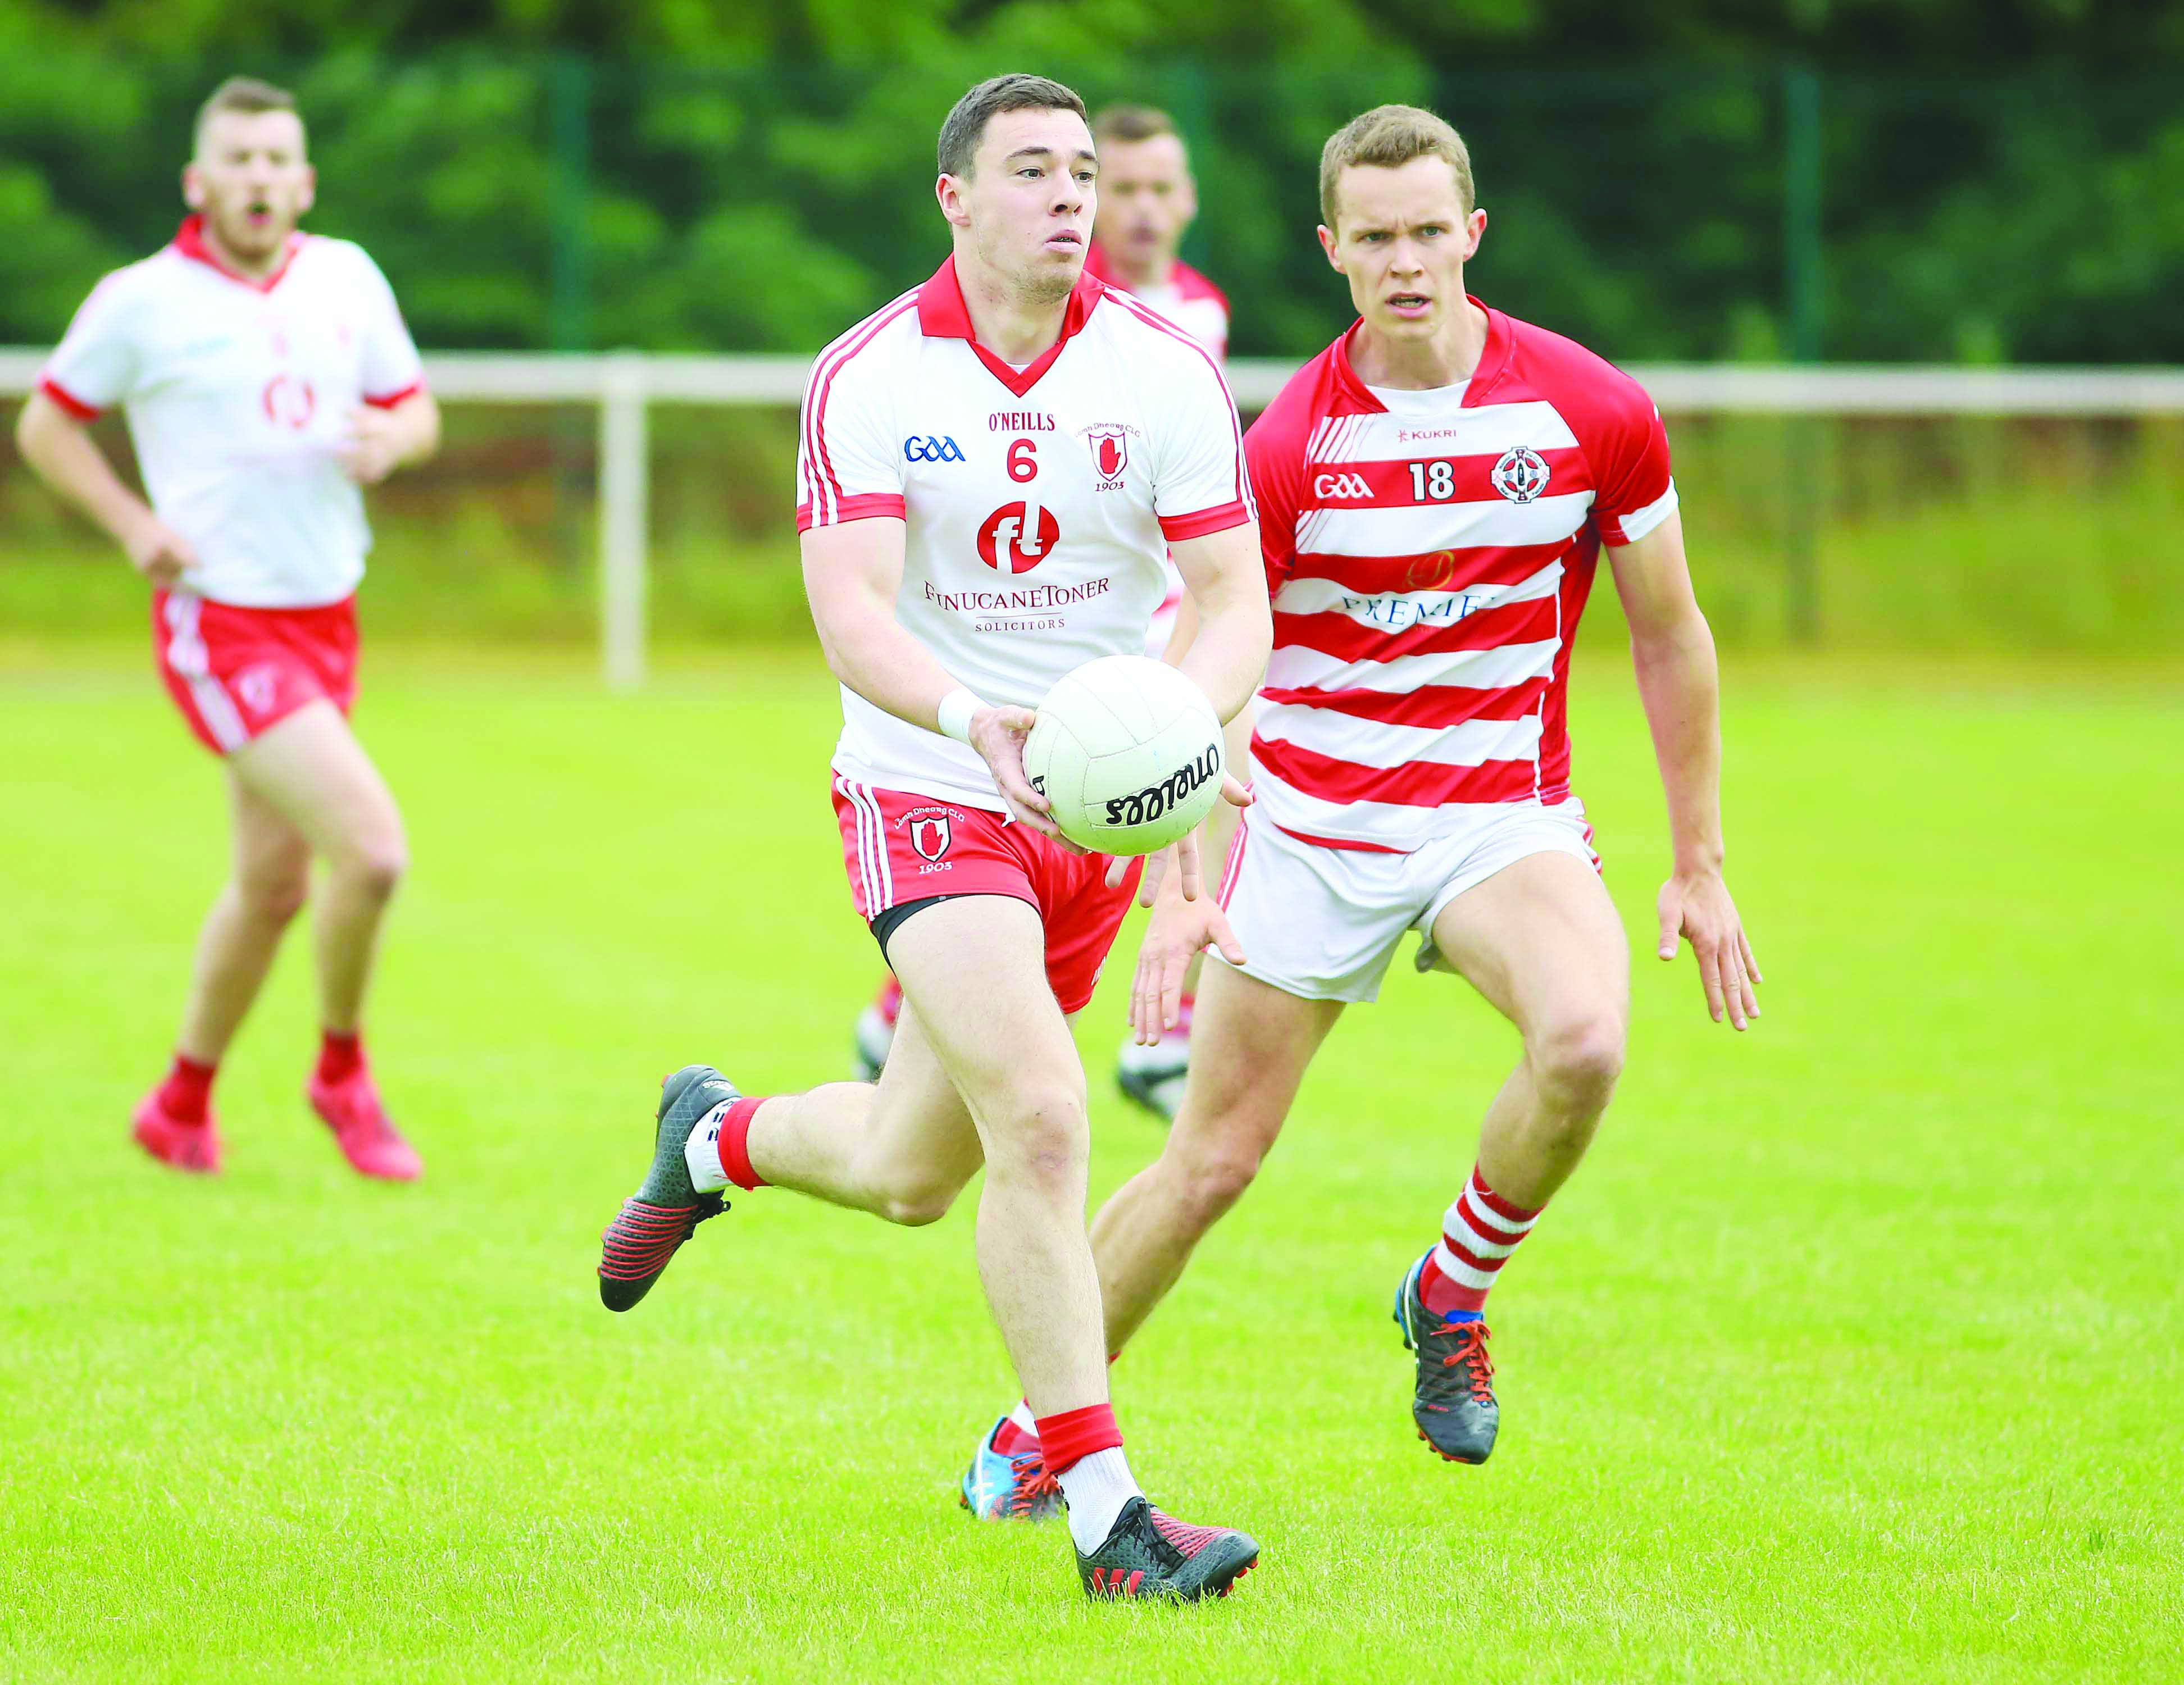 Lámh Dhearg’s Declan Lynch pictured in action against St Paul’s defender Stephen Rooney during their Division One clash earlier this season. The sides meet again in Saturday’s SFC preliminary round clash at Corrigan Park 